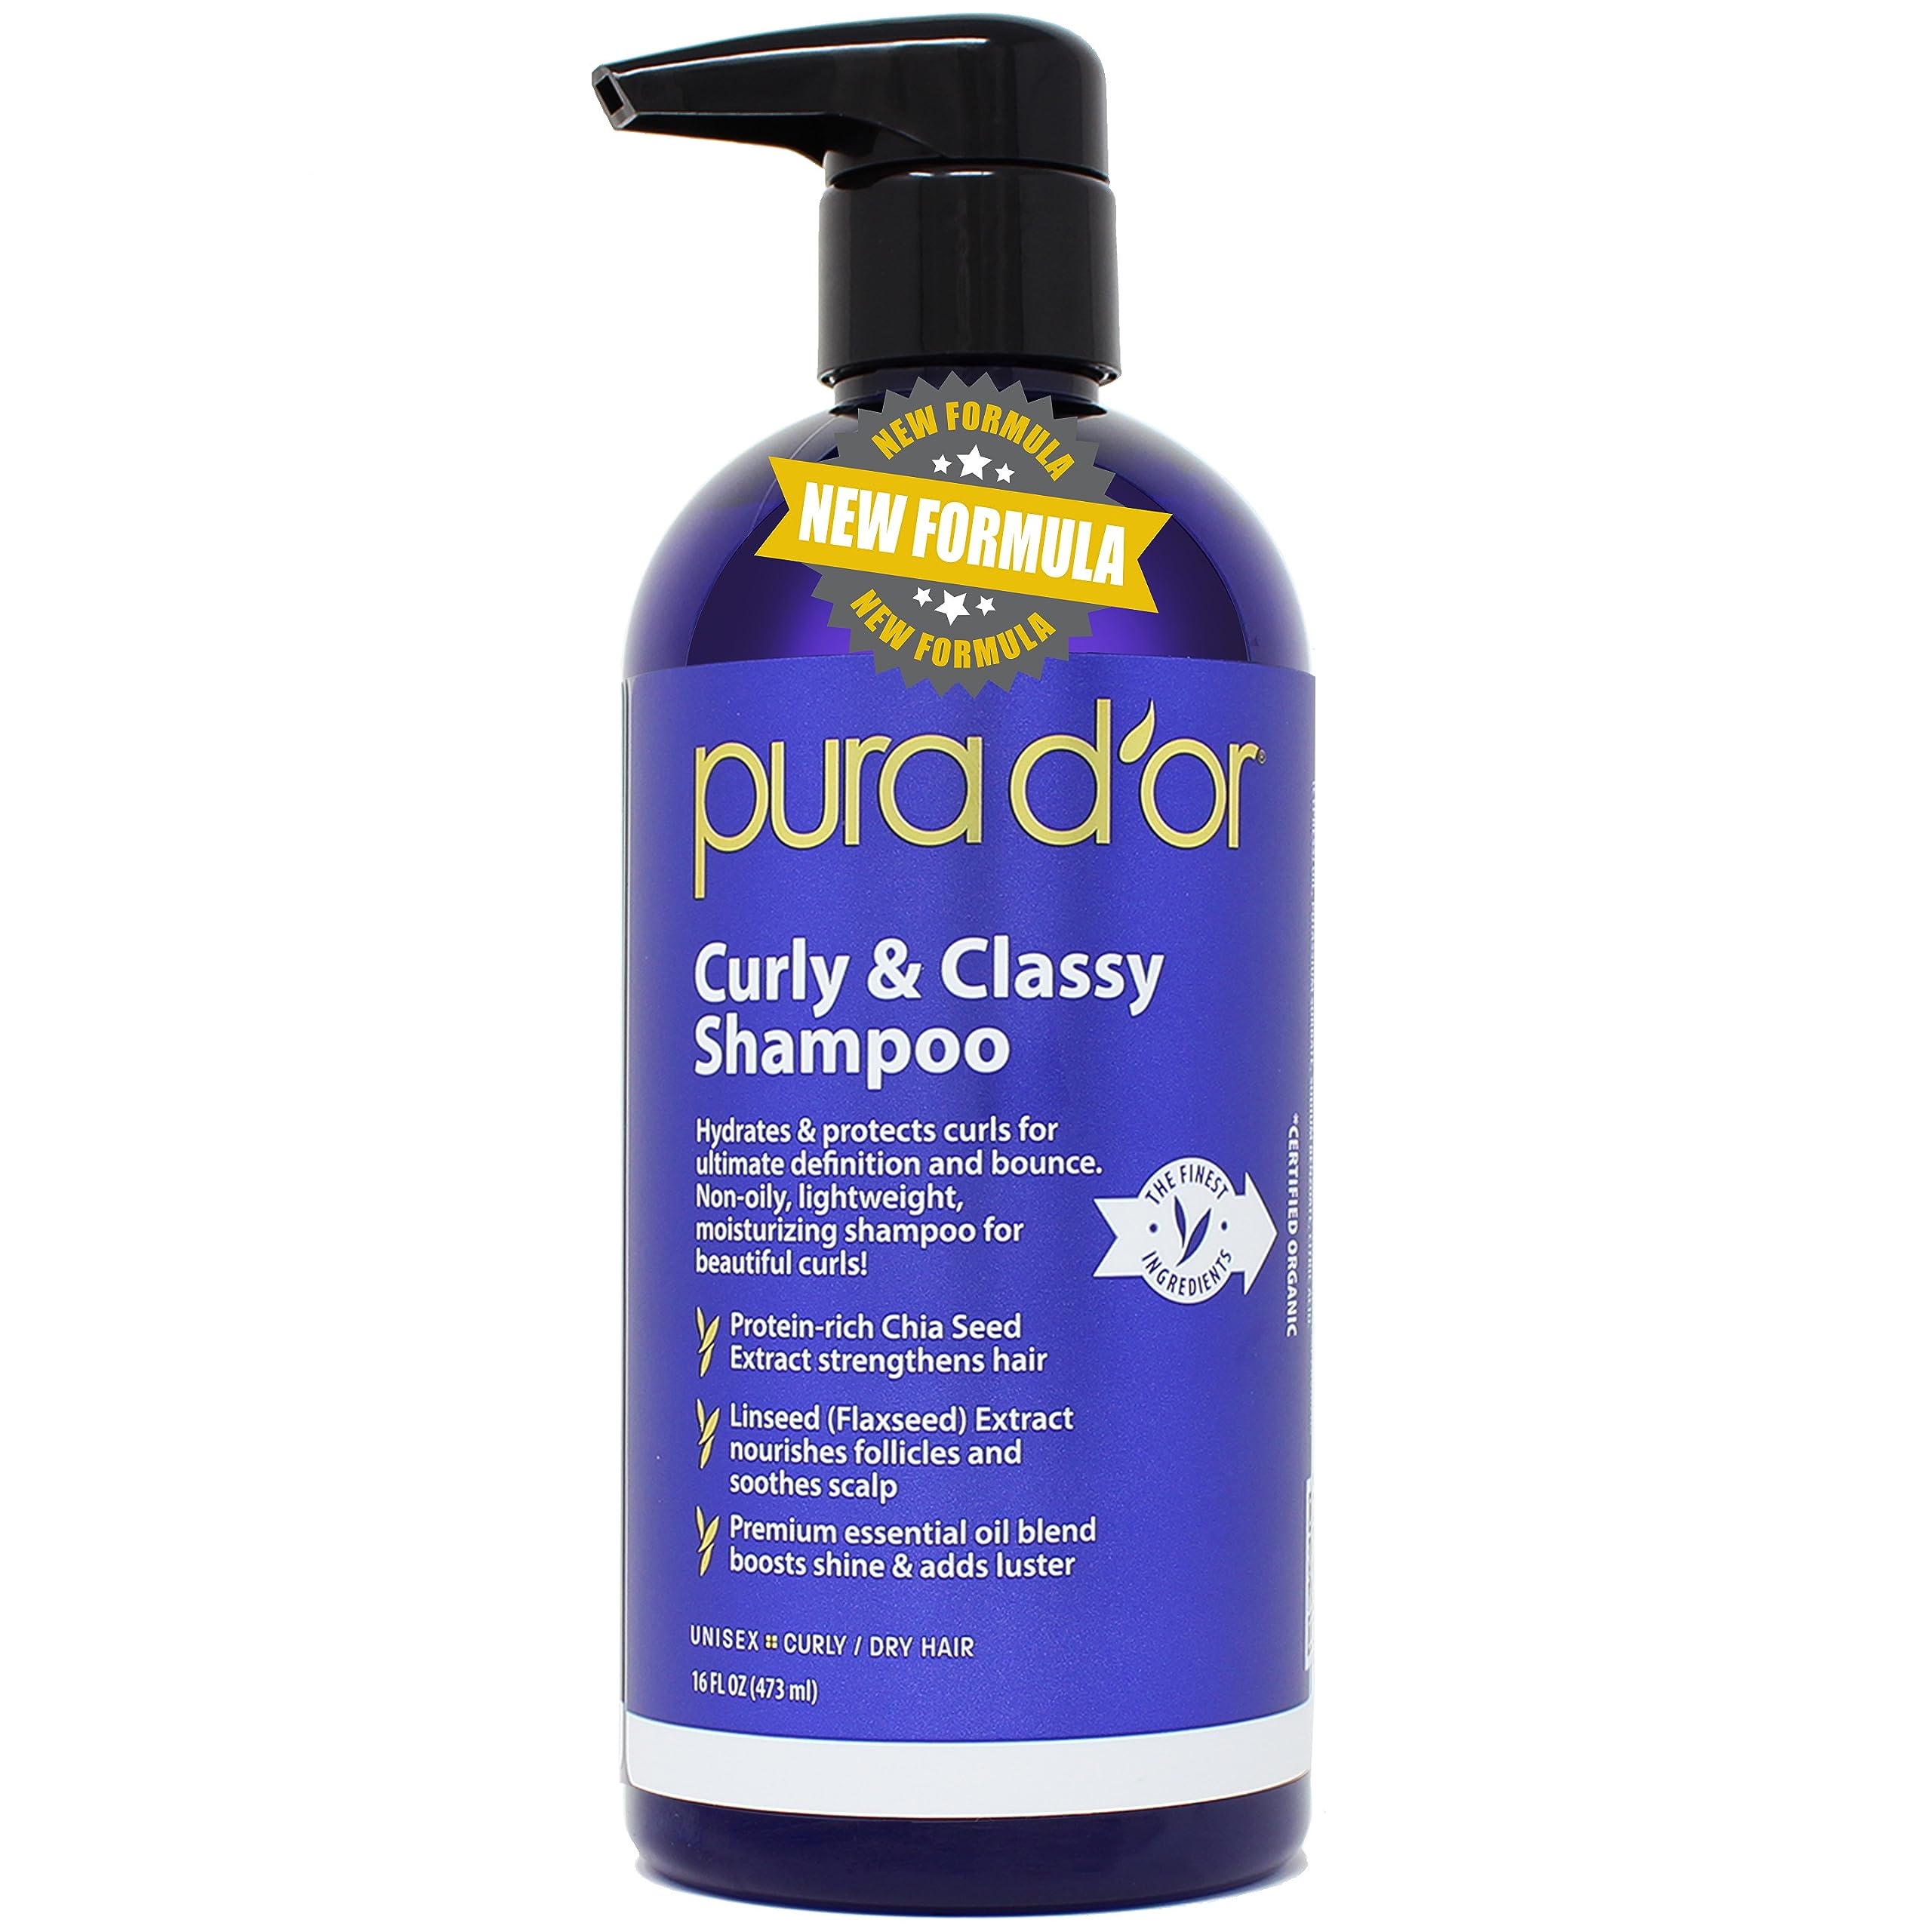 PURA D'OR Curly & Classy Shampoo (16oz) with Argan Oil, Castor Oil, Geranium Oil, and Bergamot Oil - Nourishing and Hydrating Formula for Luscious Curls